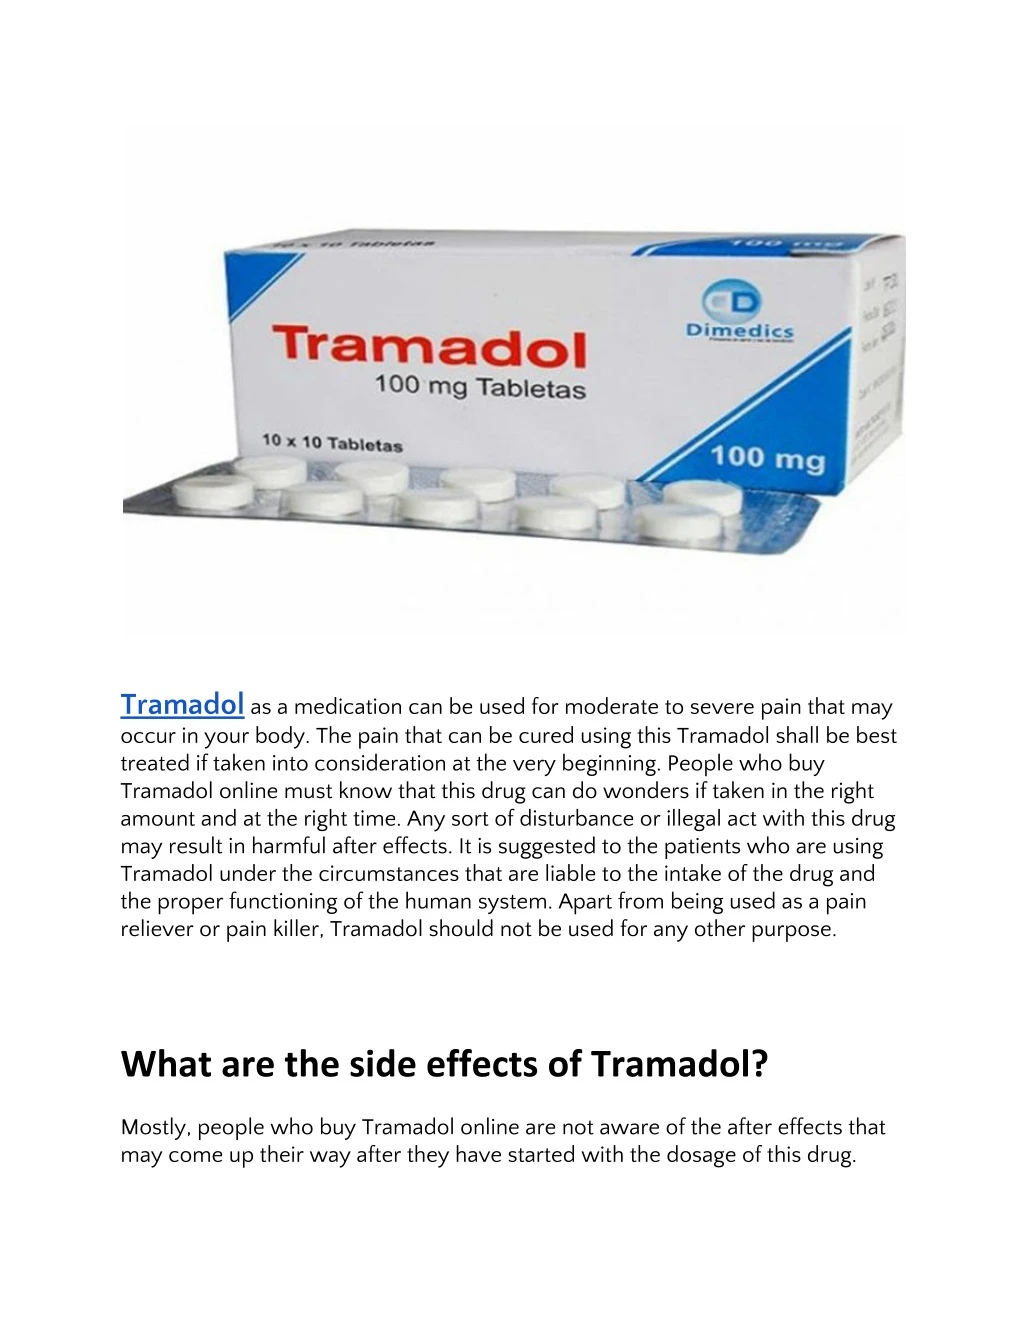 tramadol as a medication can be used for moderate